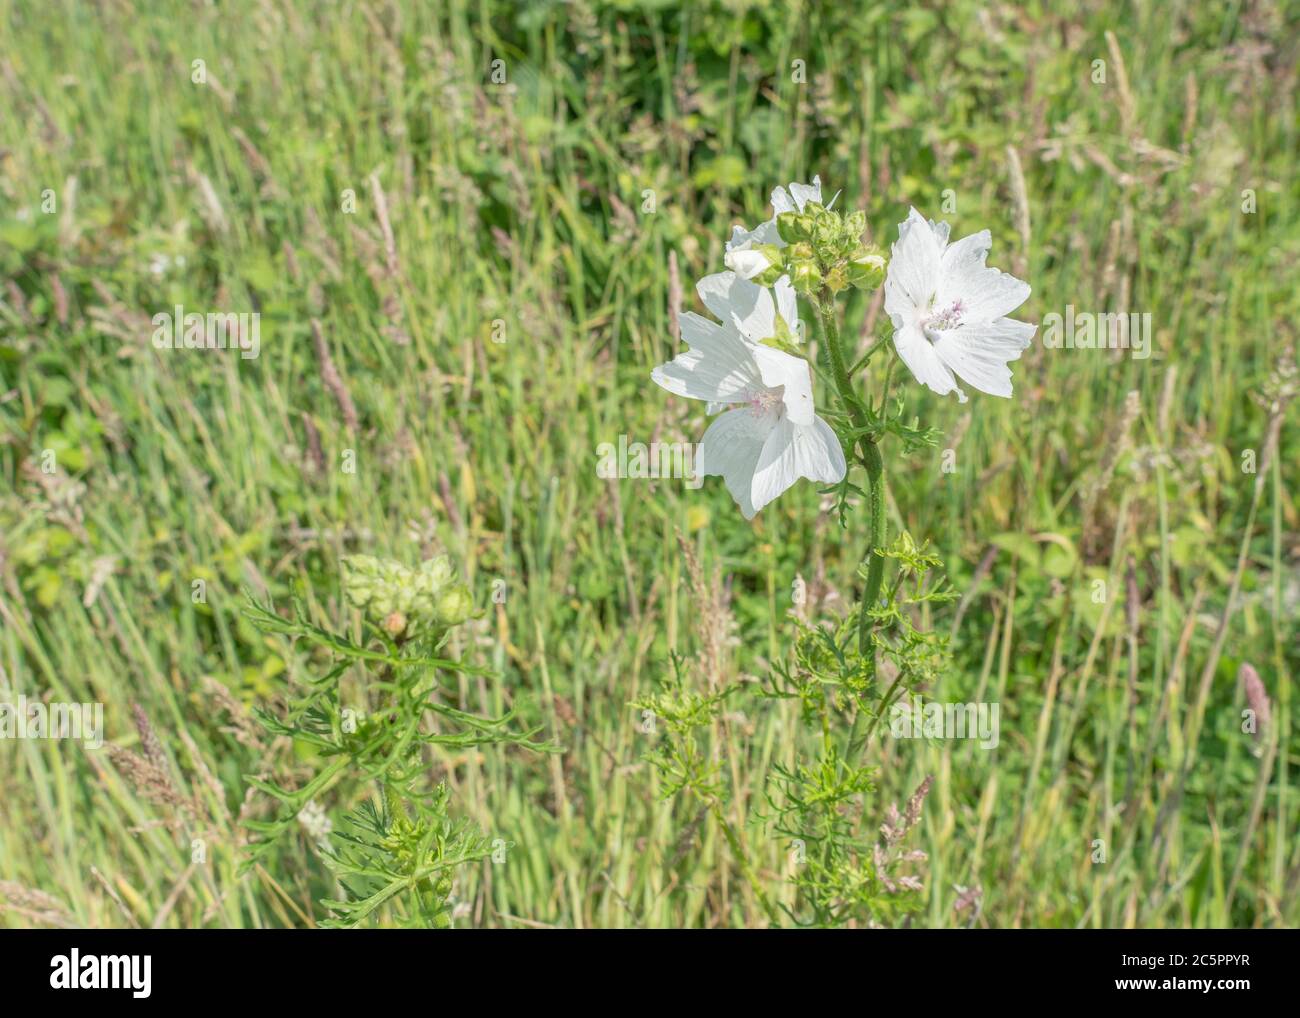 White flower form of Musk Mallow / Malva moschata. Probably variant M. moschata alba rather than true MM. Former medicinal plant used for herbal cures Stock Photo